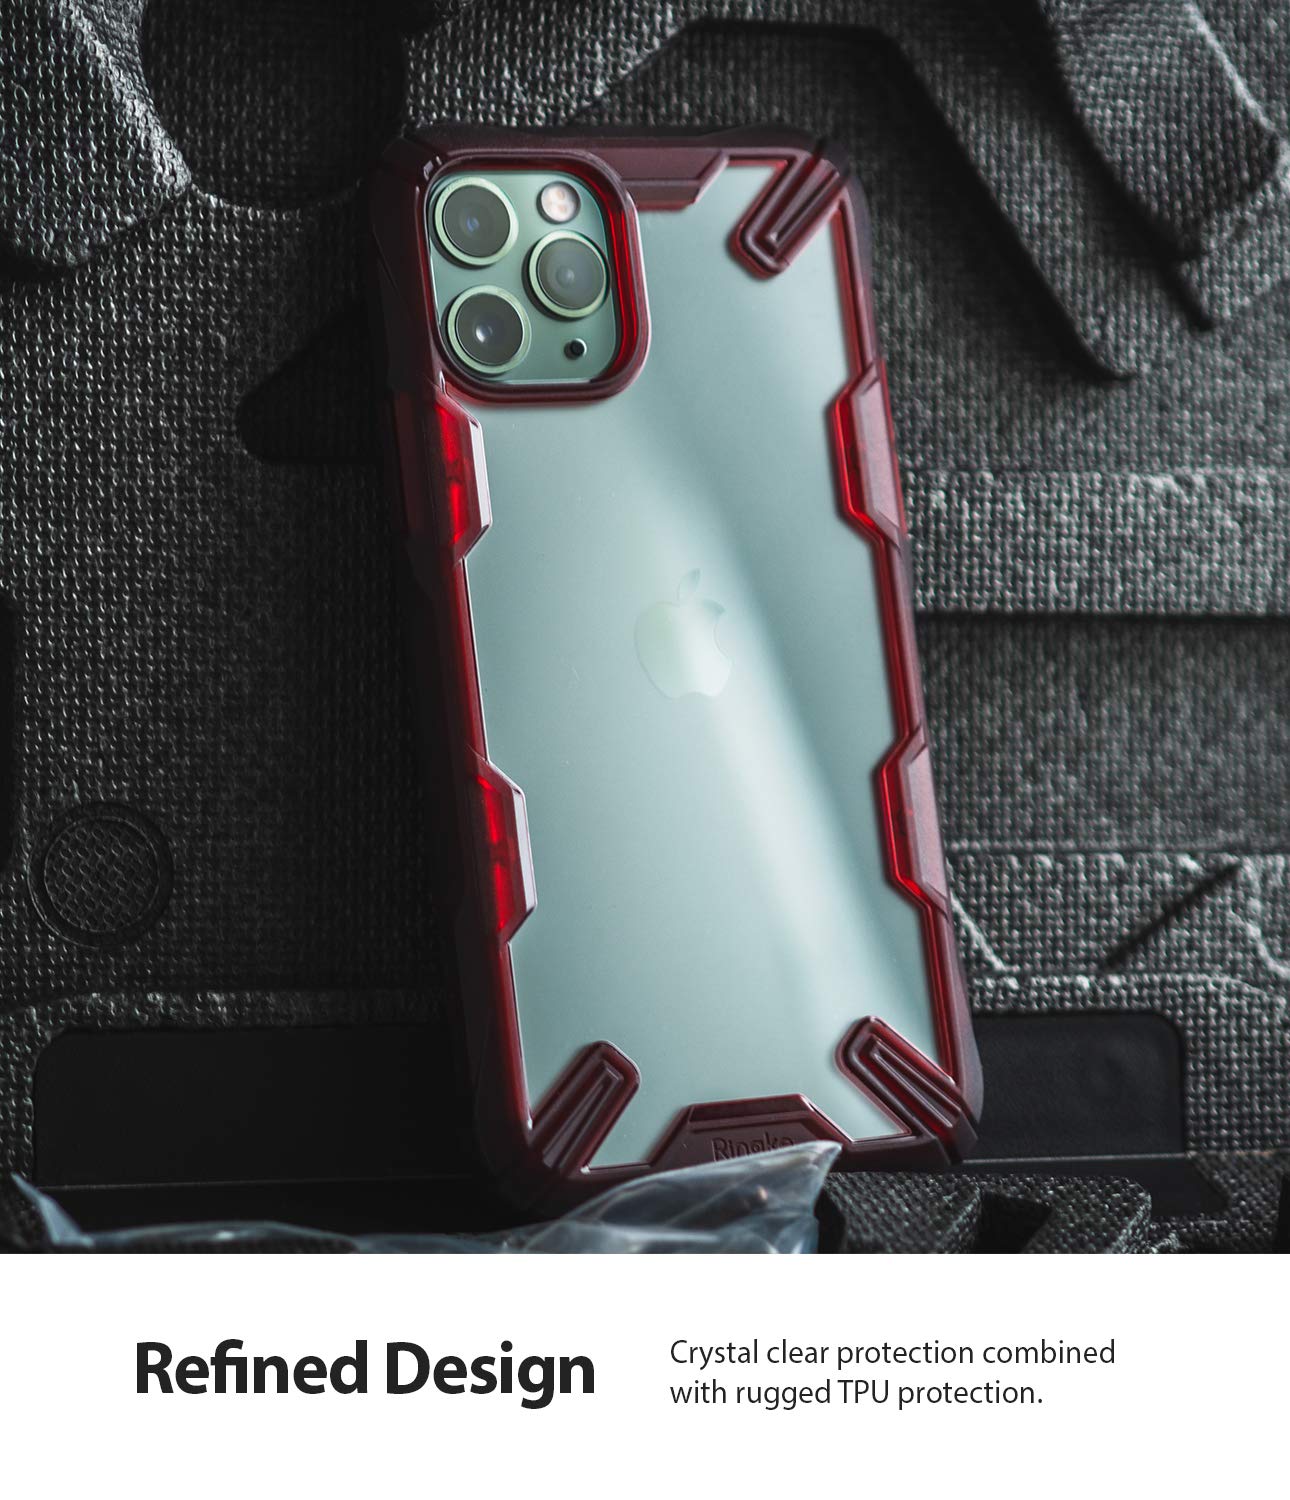 iPhone 11 Pro Max Case Ruby Red Fusion-X by Ringke